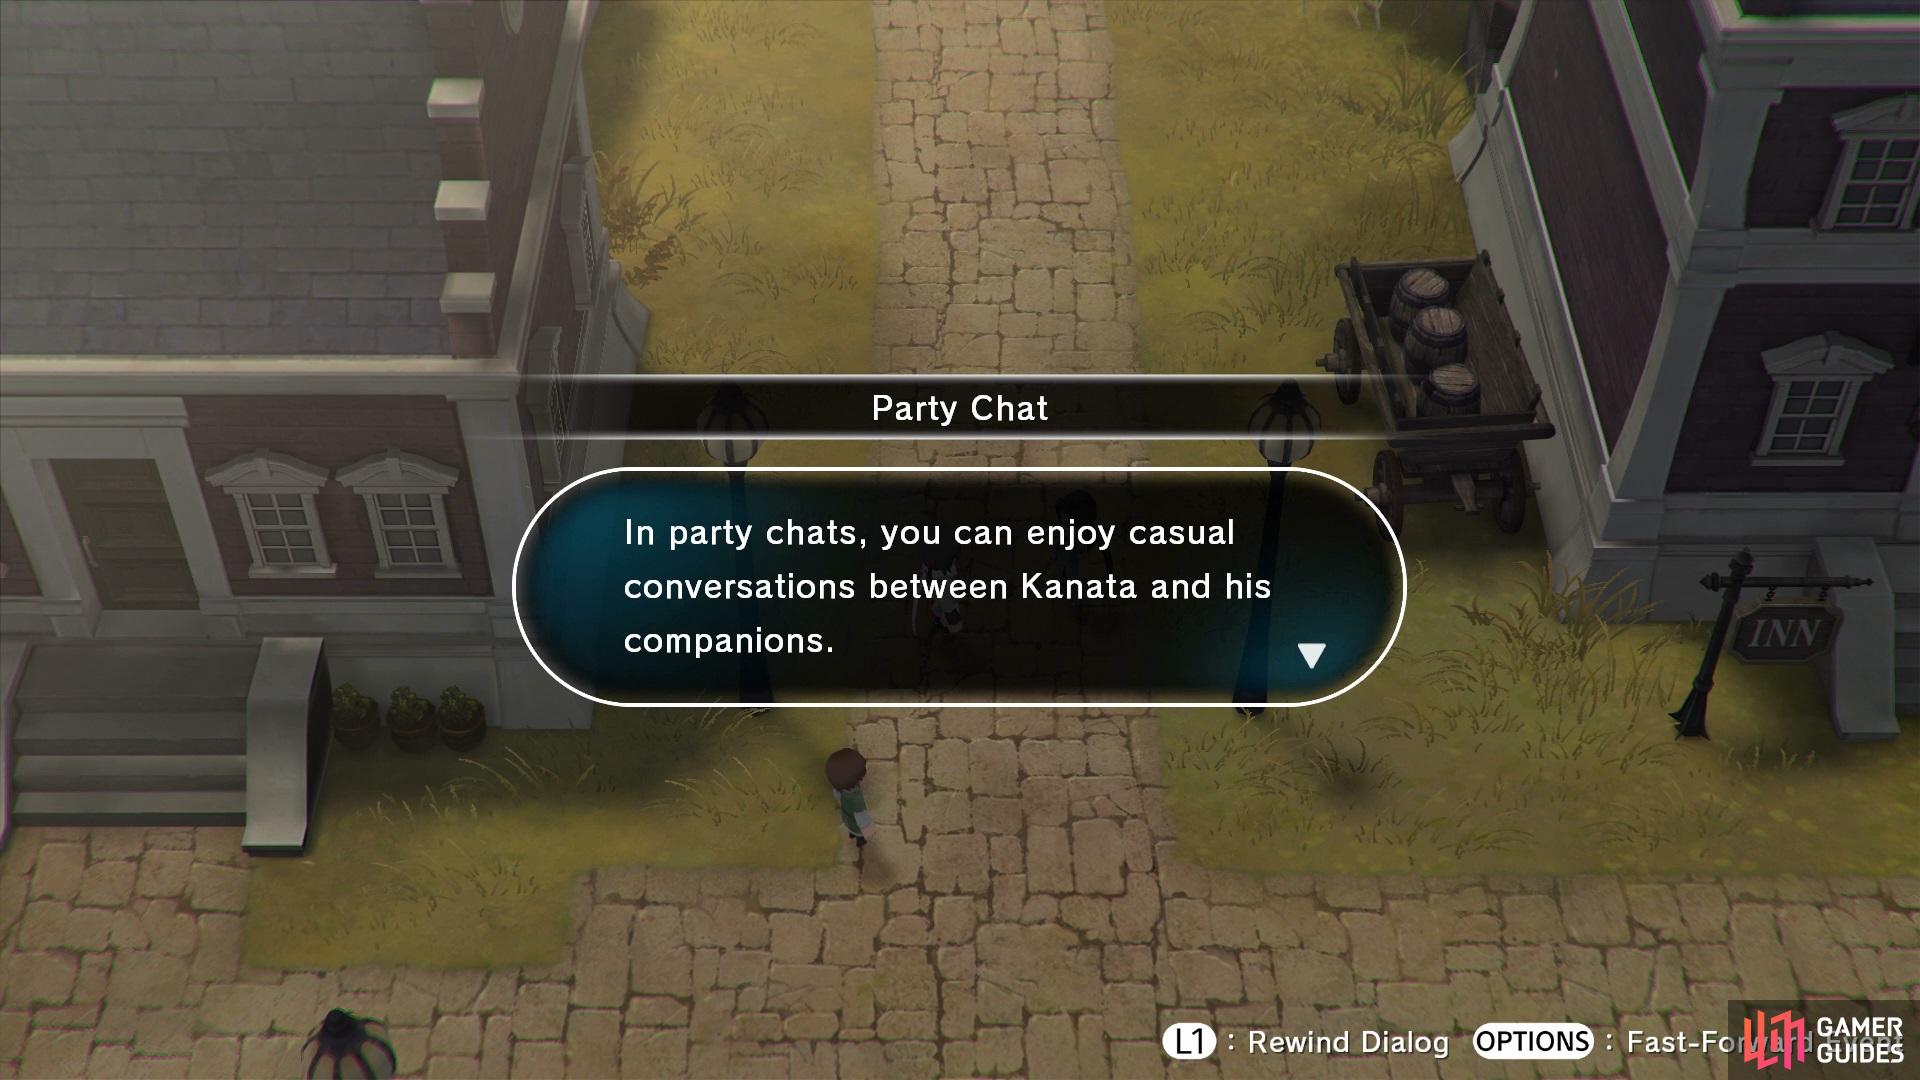 Party Chat not only gives you a chance to see interactions between all characters, but it’s helpful in case you get lost, too.